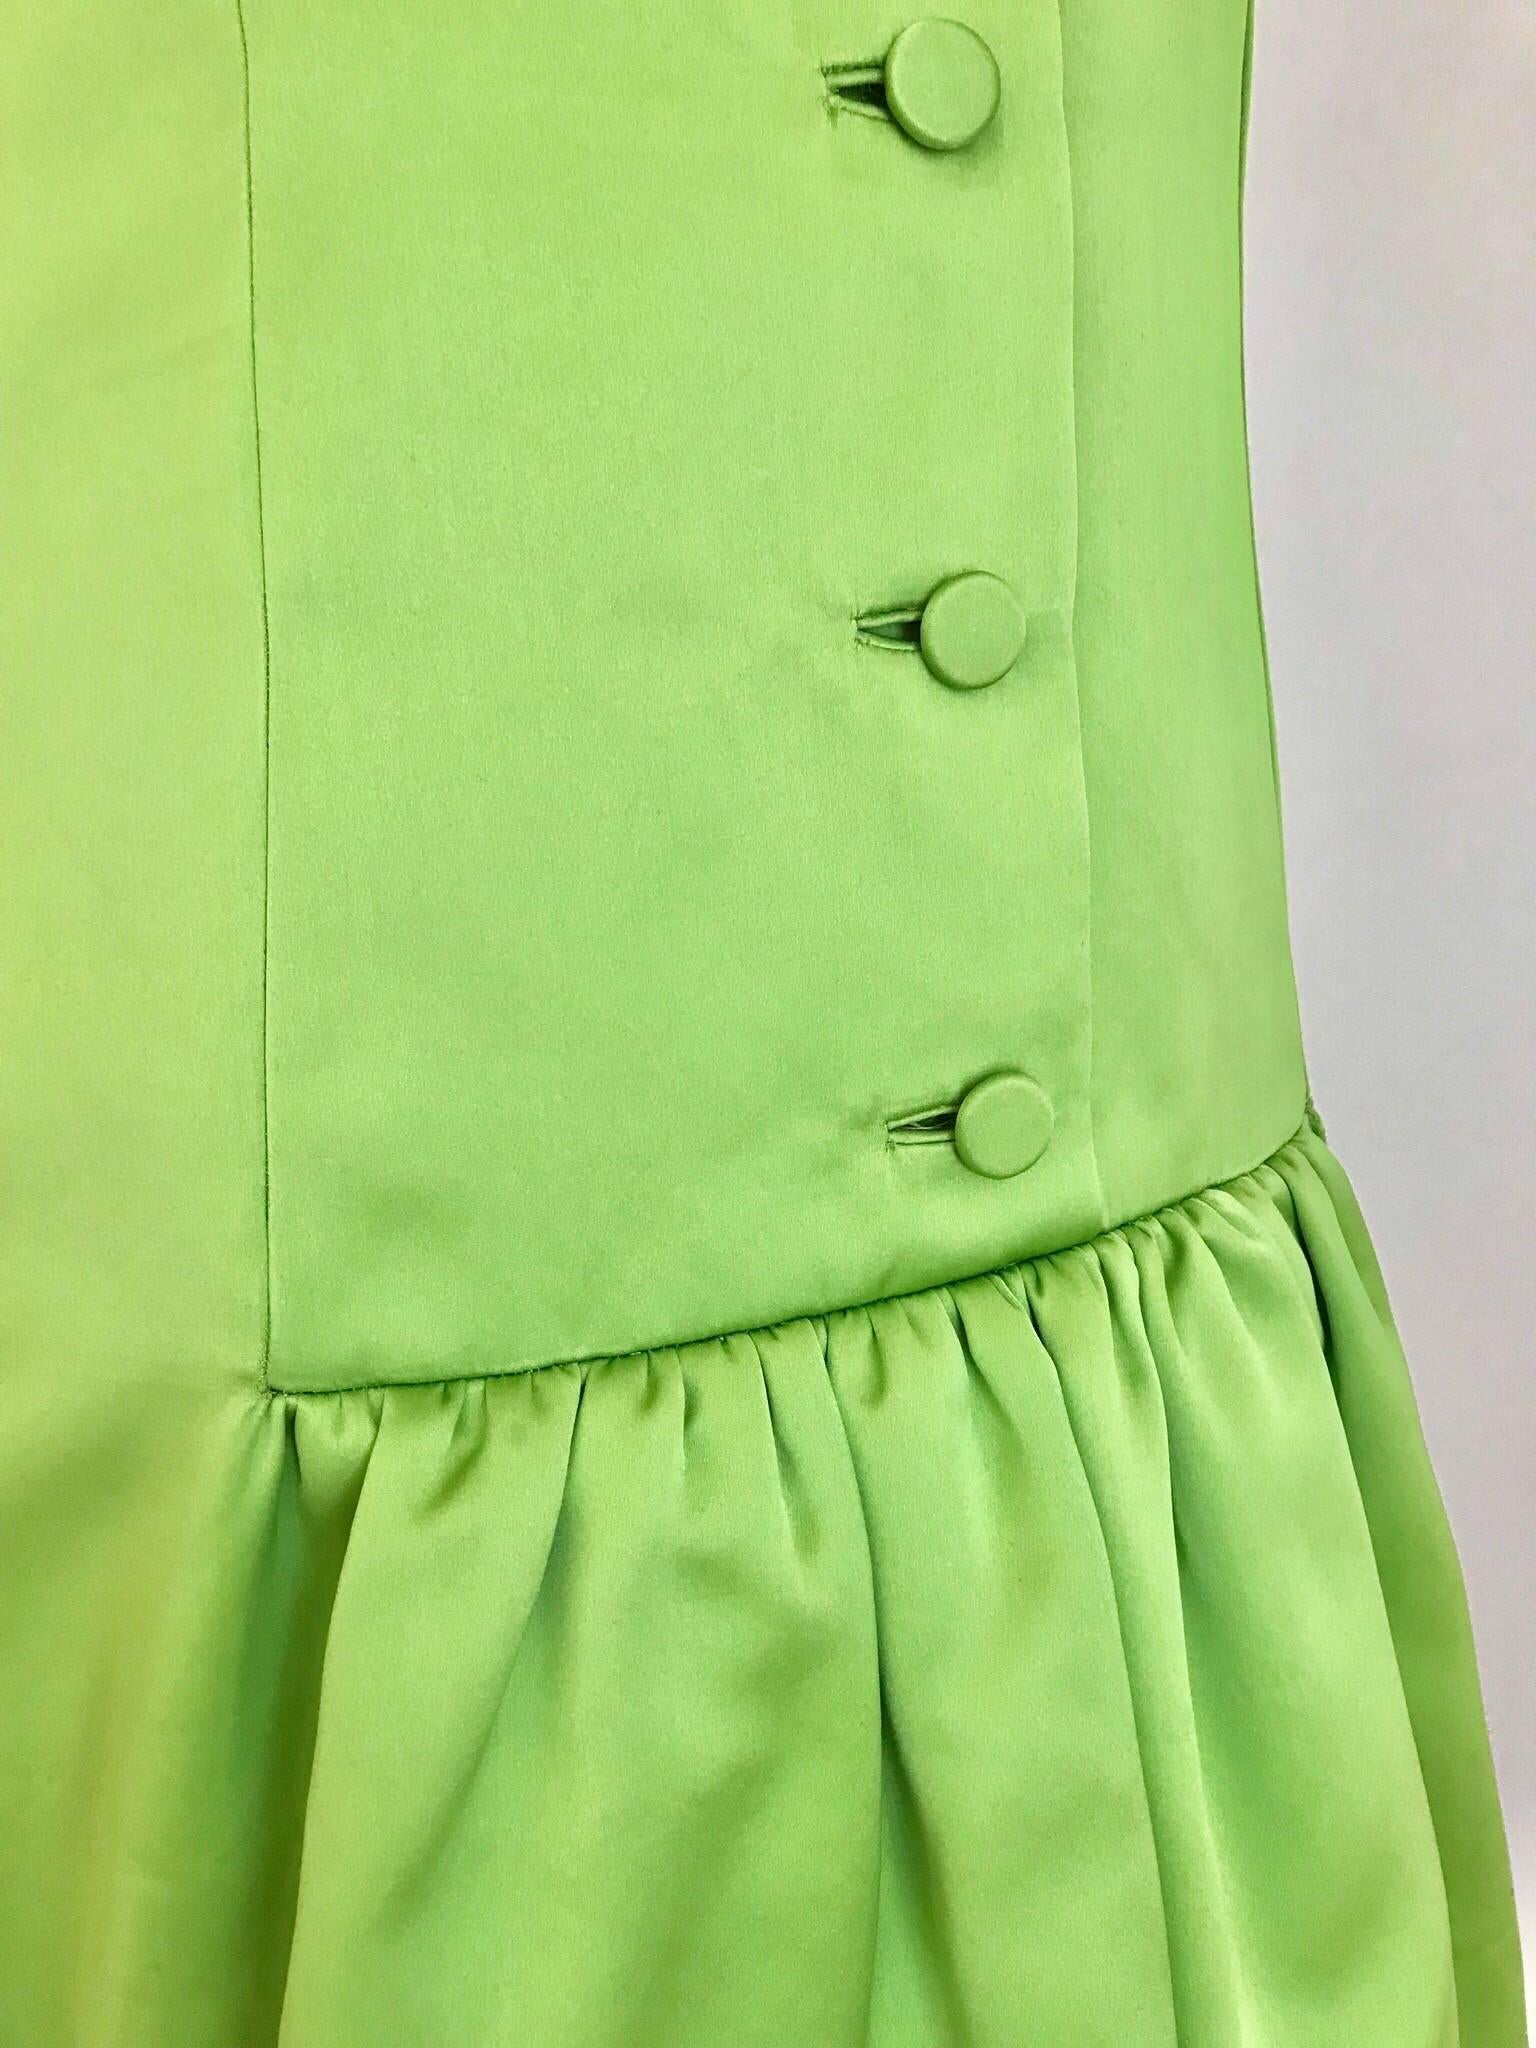 Chic Vintage 1960s Geoffrey Beene lime green silk satin drop waist cocktail dress. Perfect for summer party dress or wedding.
Dress is lined in silk. Fit best for size 4 ( small ( please see the measurement)
Bust: 34 inches/ Waist: 34 inches/ hip: